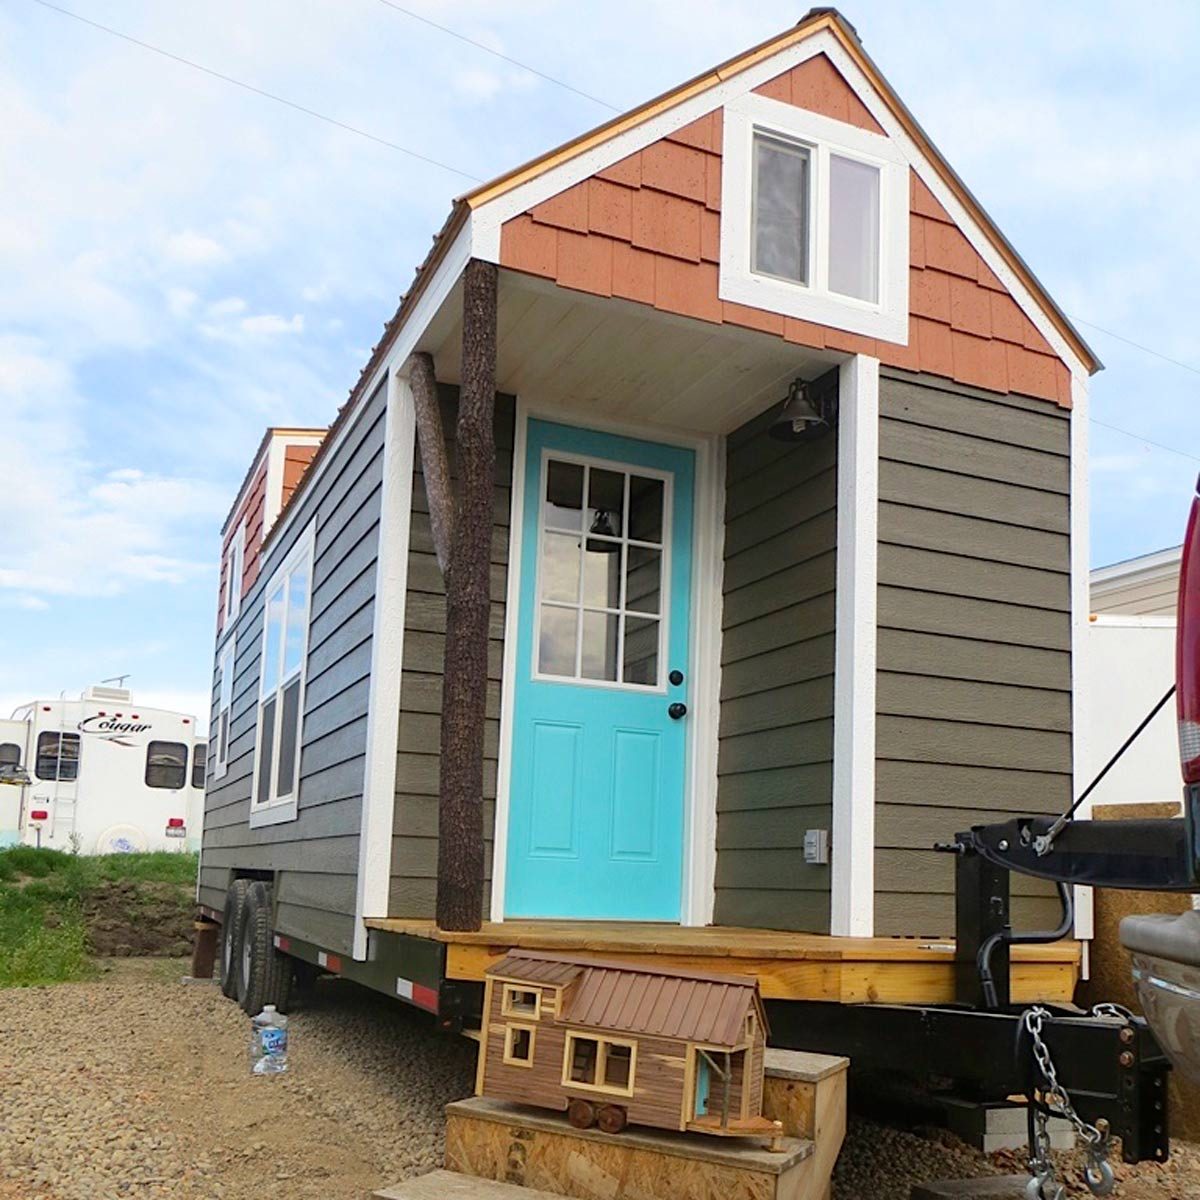 Tiny House for Sale - New Tiny Home - Ideal for sleeping